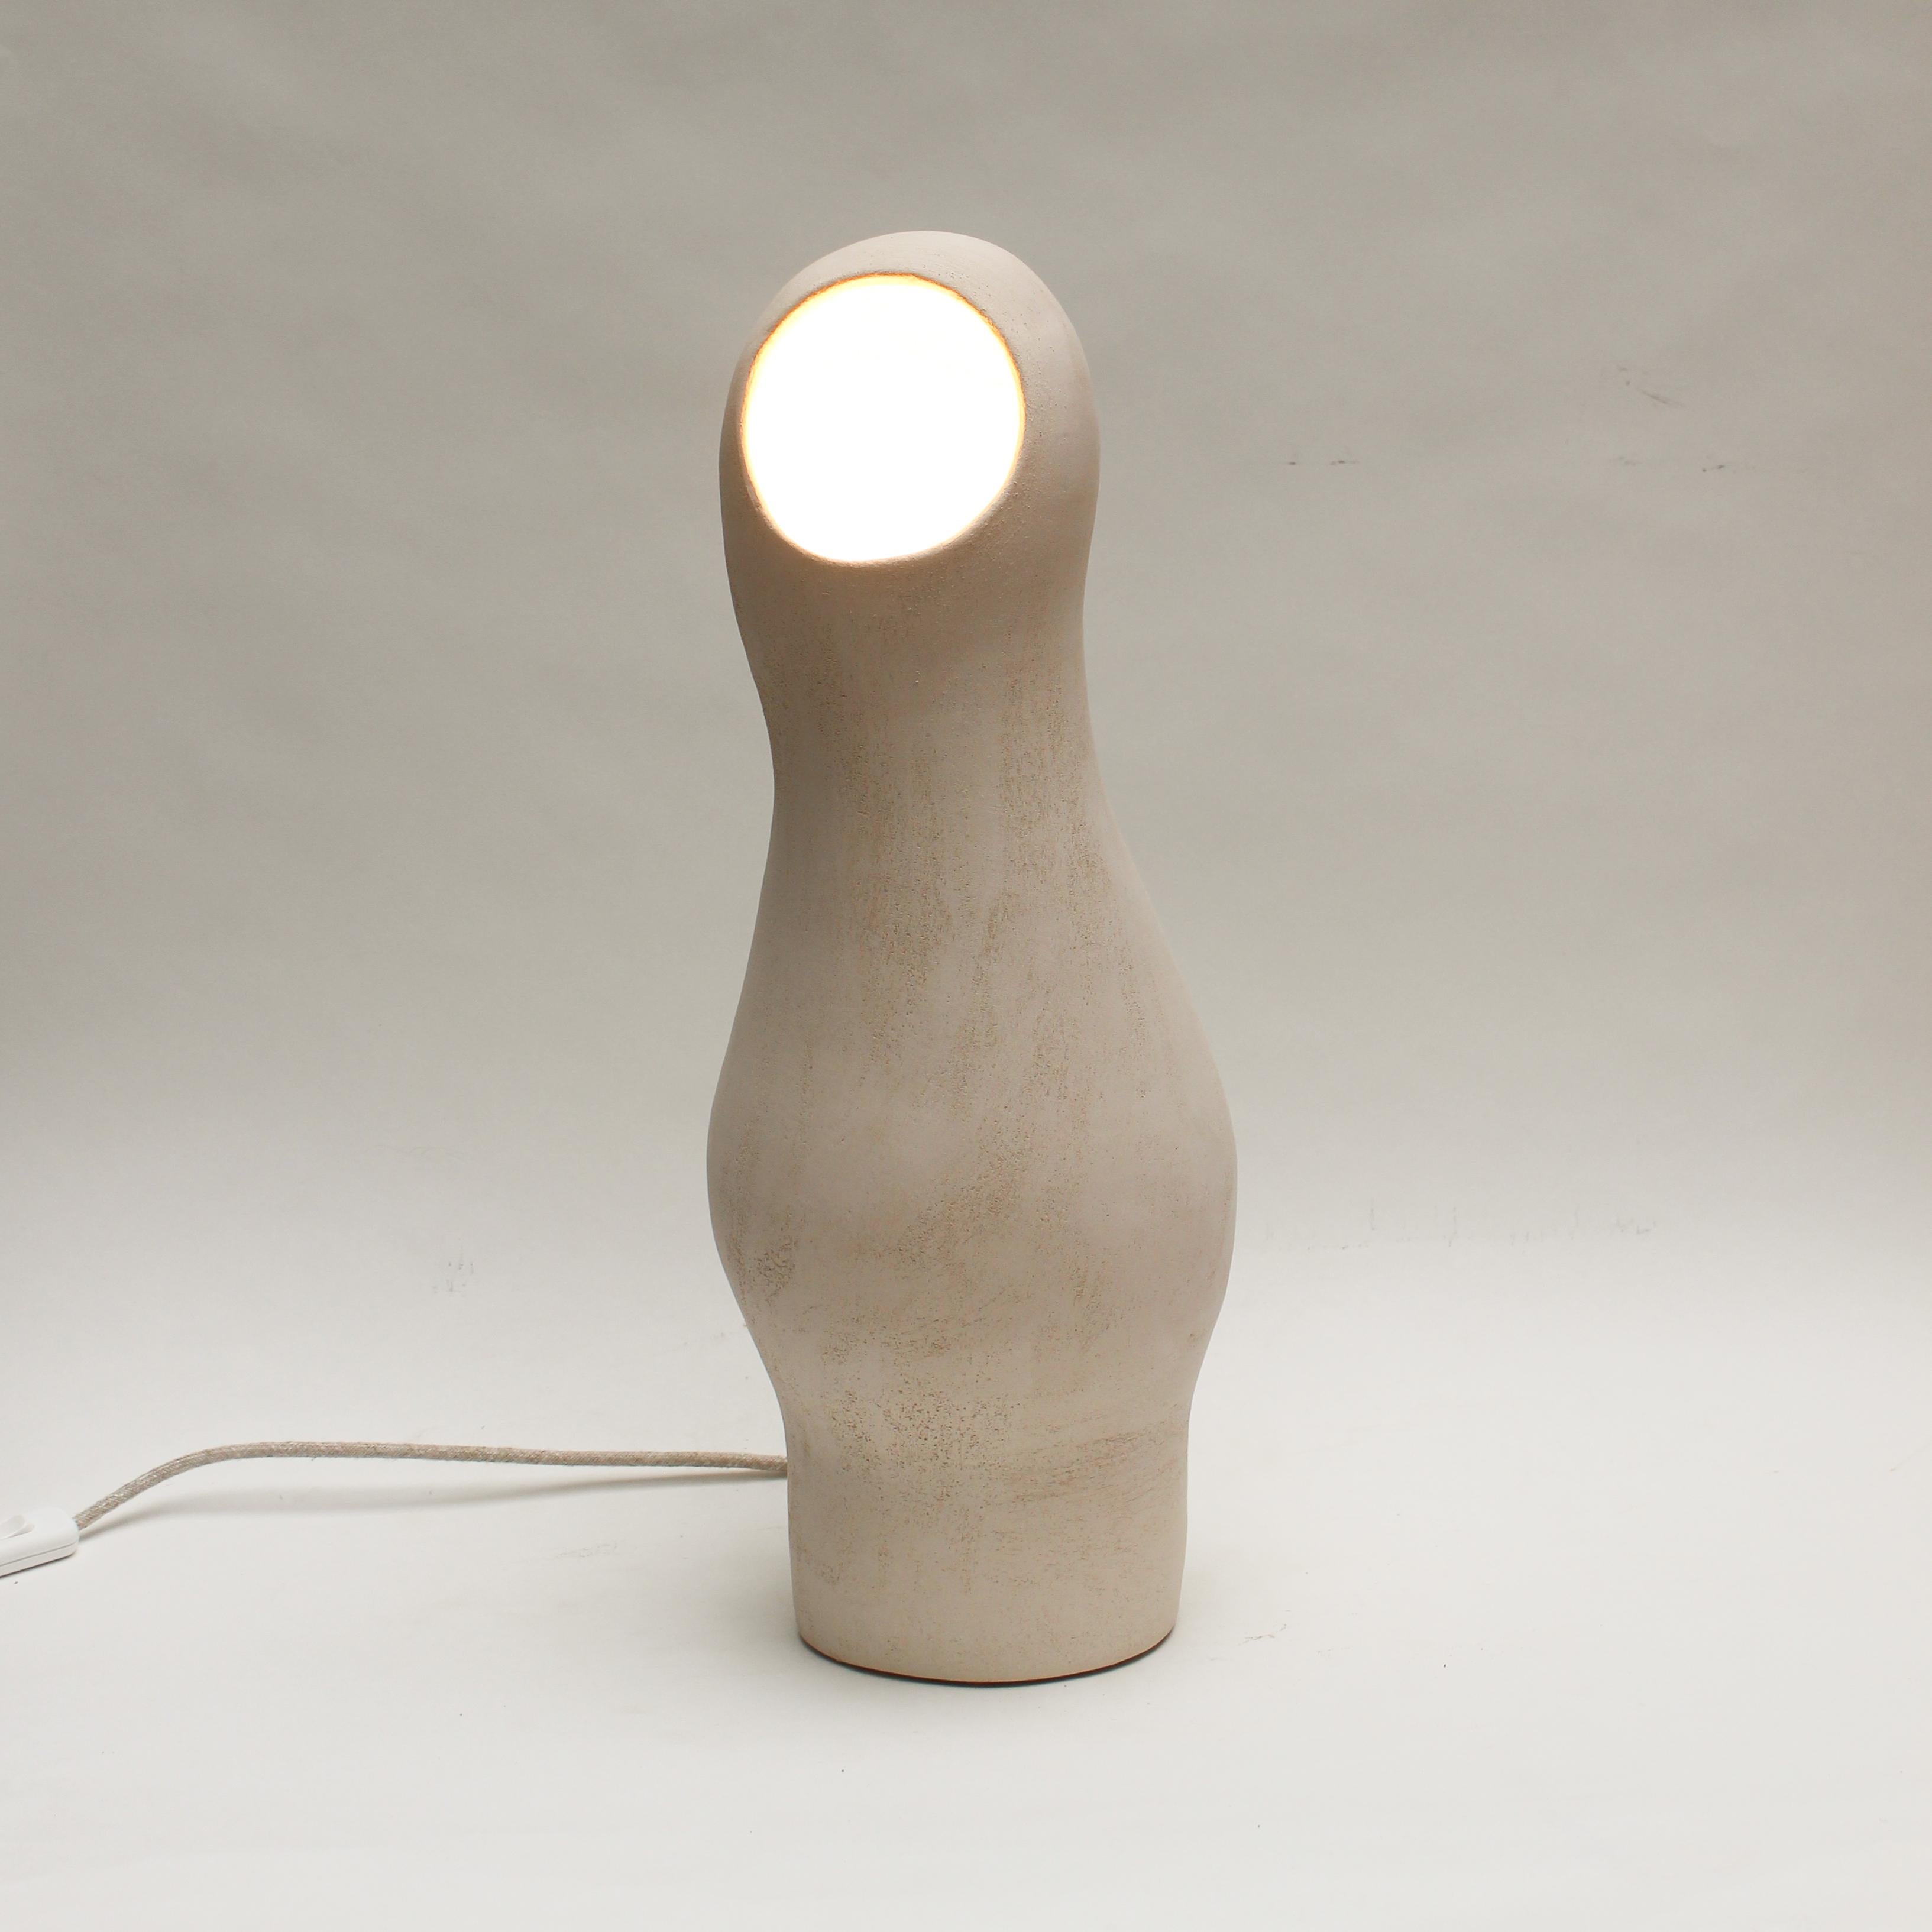 Cocon #4 white stoneware lamp by Elisa Uberti
Dimensions: high around 50cm
Materials: white stoneware

After fifteen years in fashion, Elisa Uberti decides to take the time to work with these hands and to give birth to new projects.

Designer